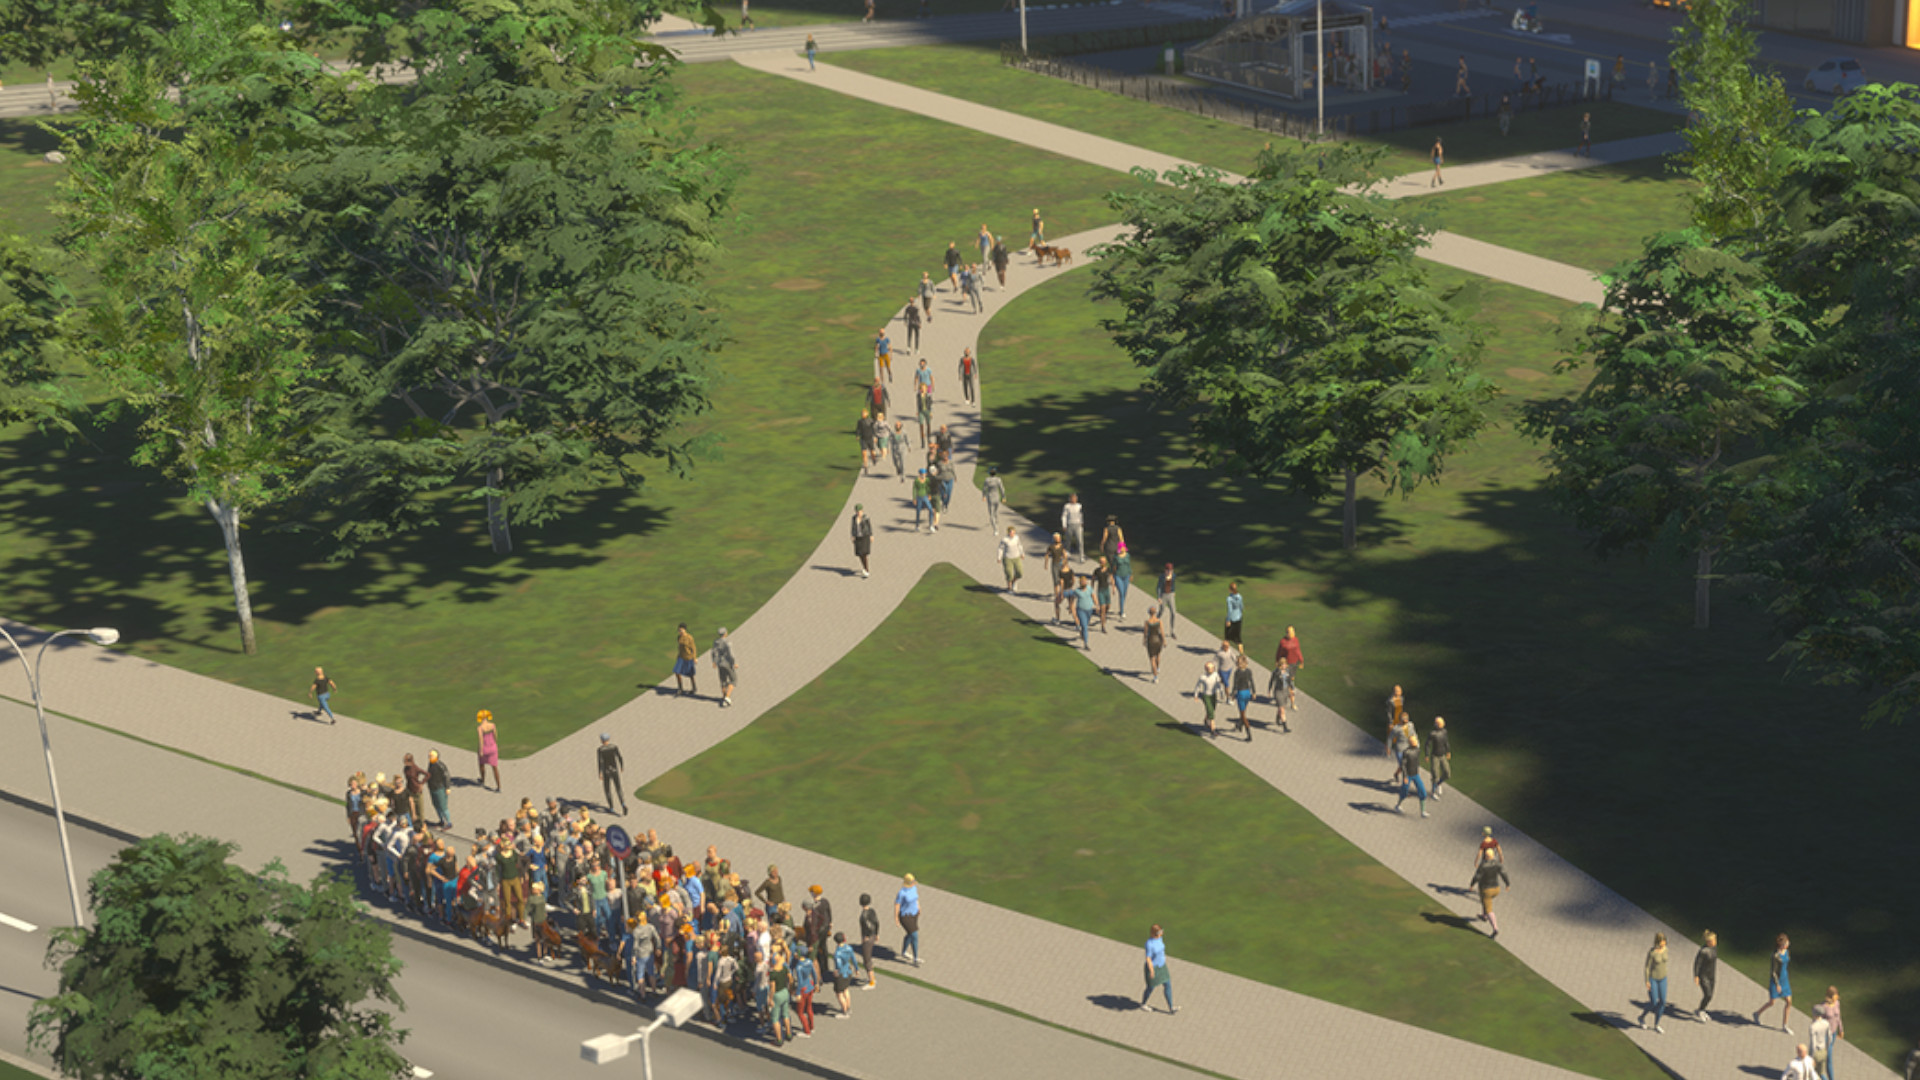 Cities: Skylines 2 has been delayed until 2024, but only on consoles